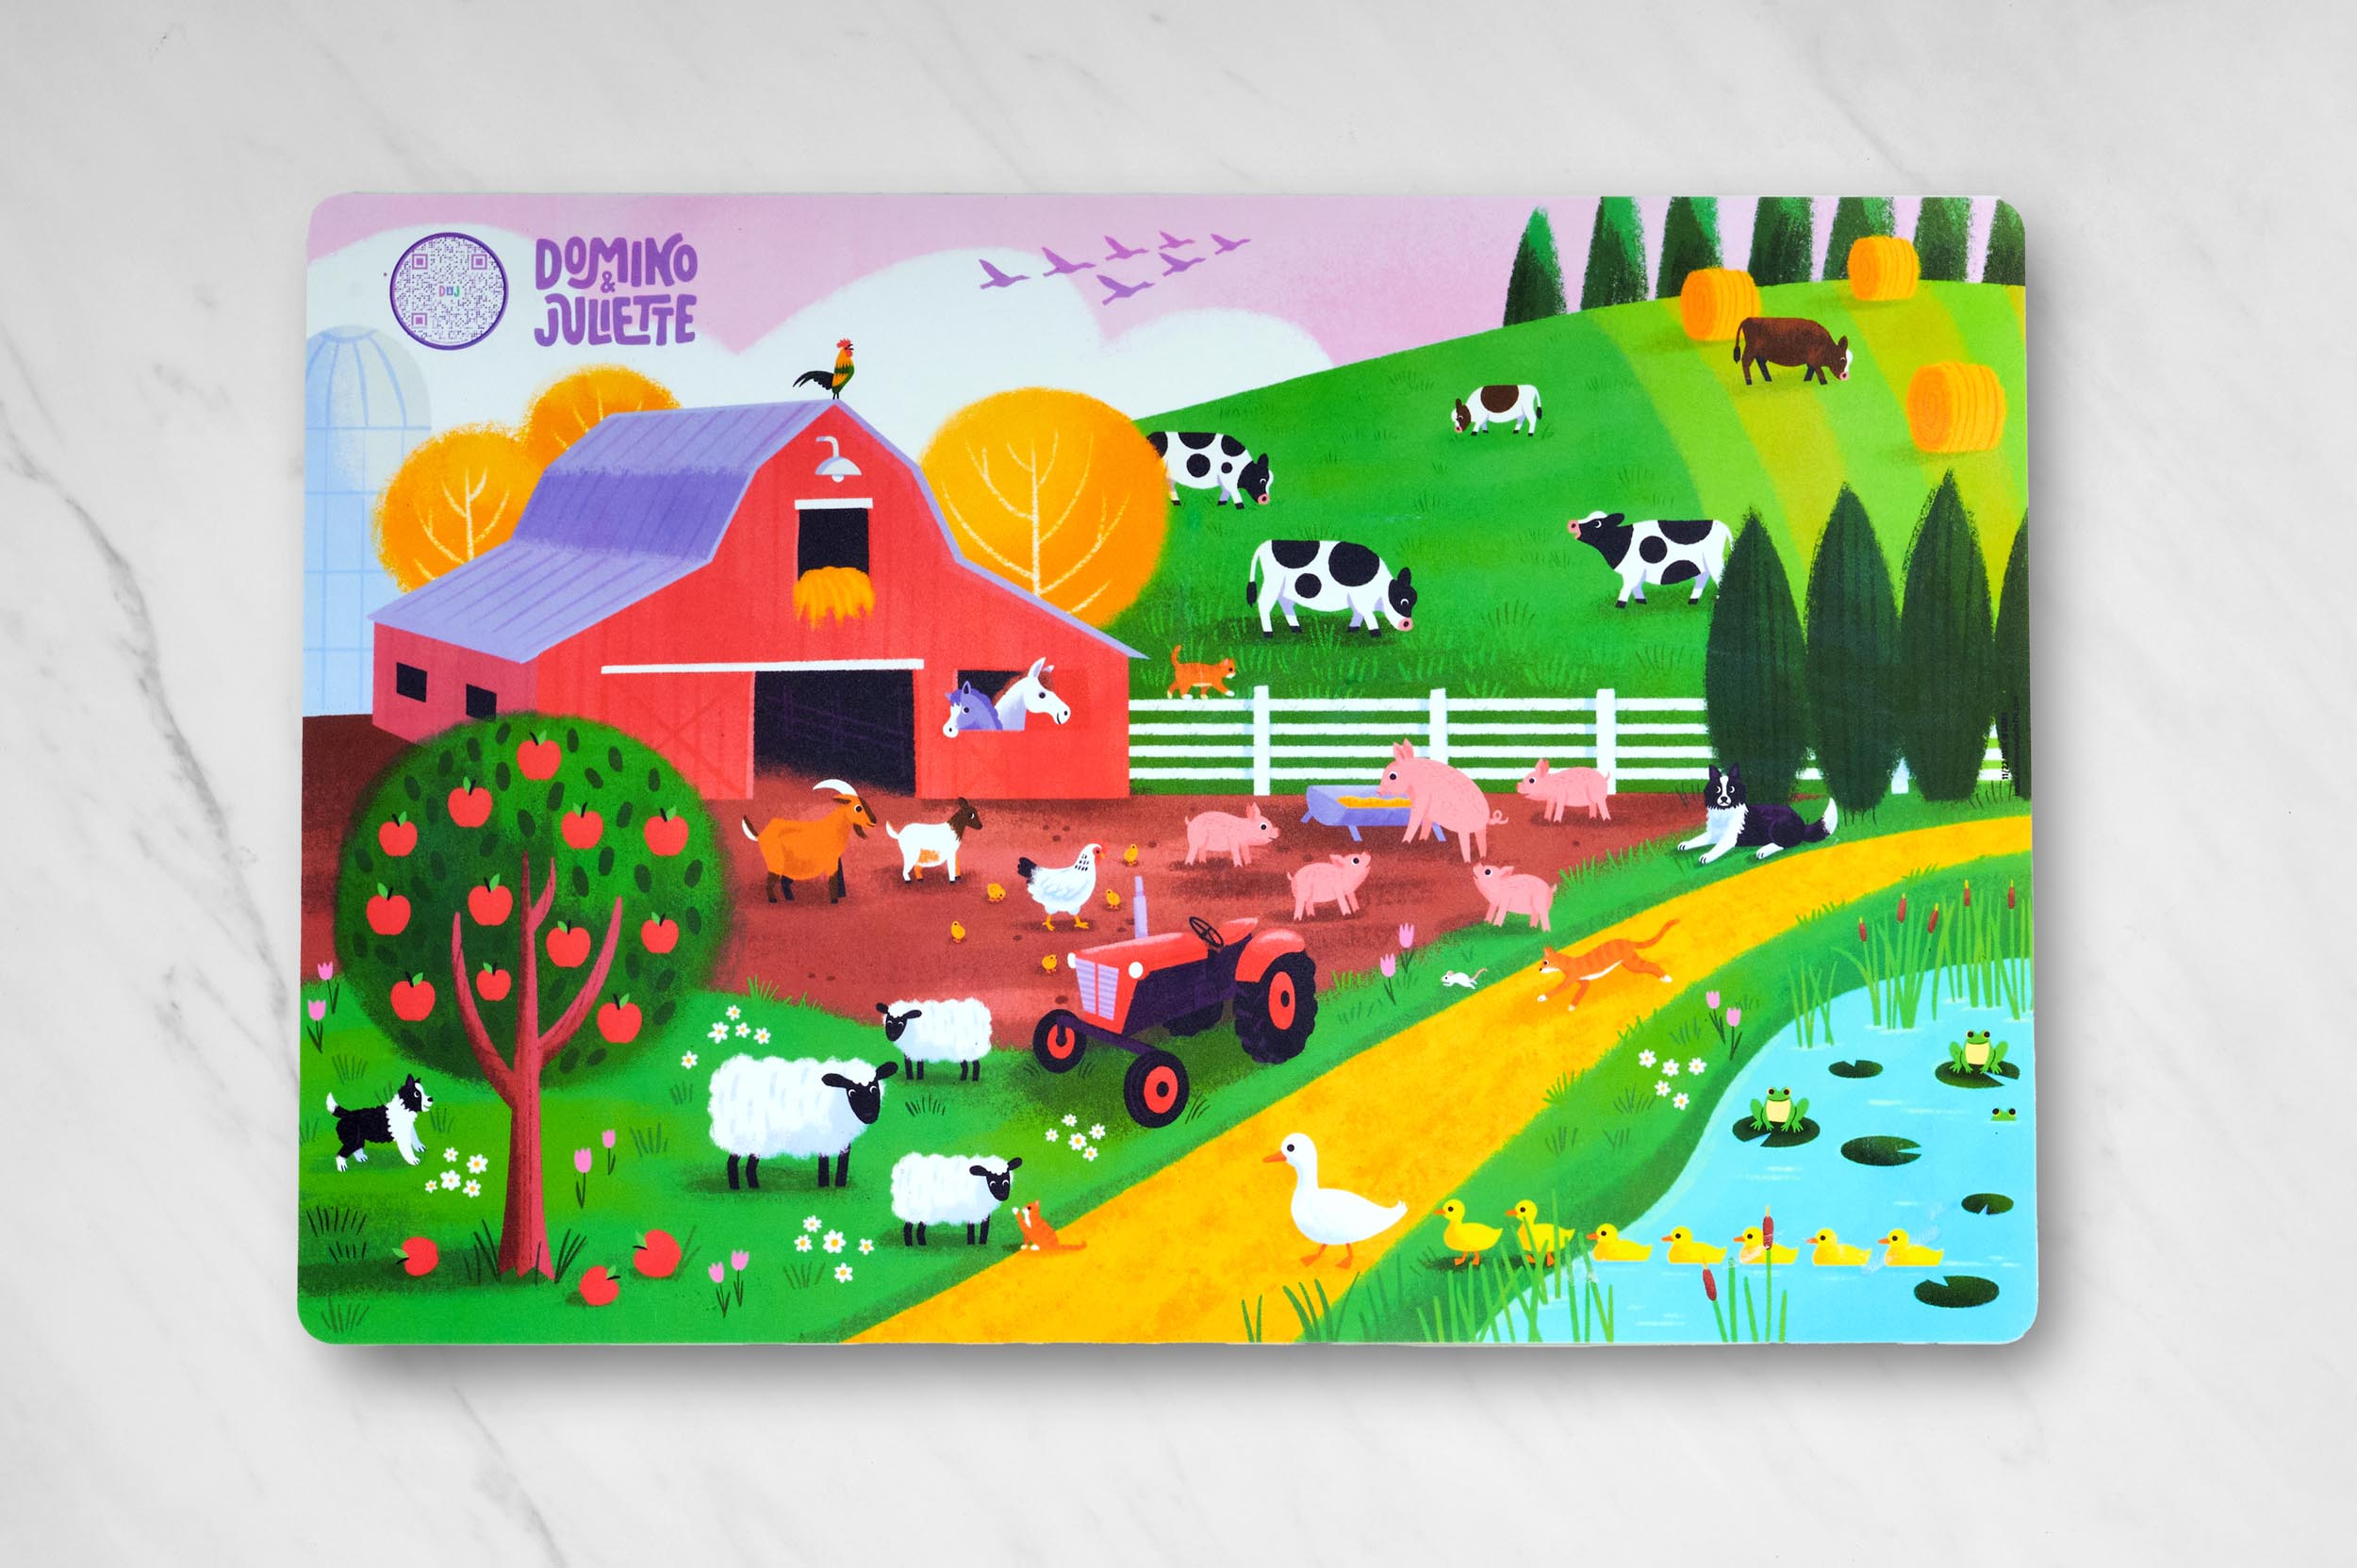 On the Farm Placemat, Farm Animal Placemats, Children's Placemat, Educational Tool for Kids at Mealtime, Farm placemats, Kindergartner-friendly activity mat with farm theme, Placemat designed for 2-year-olds with fun farm imagery, Toddlers playing and learning on farm-themed placemat, Engaging and educational farm-themed placemat for 3-year-olds, Placemat with fun farm activities for preschoolers, Engaging and entertaining placemat activities for young kids with farm animals